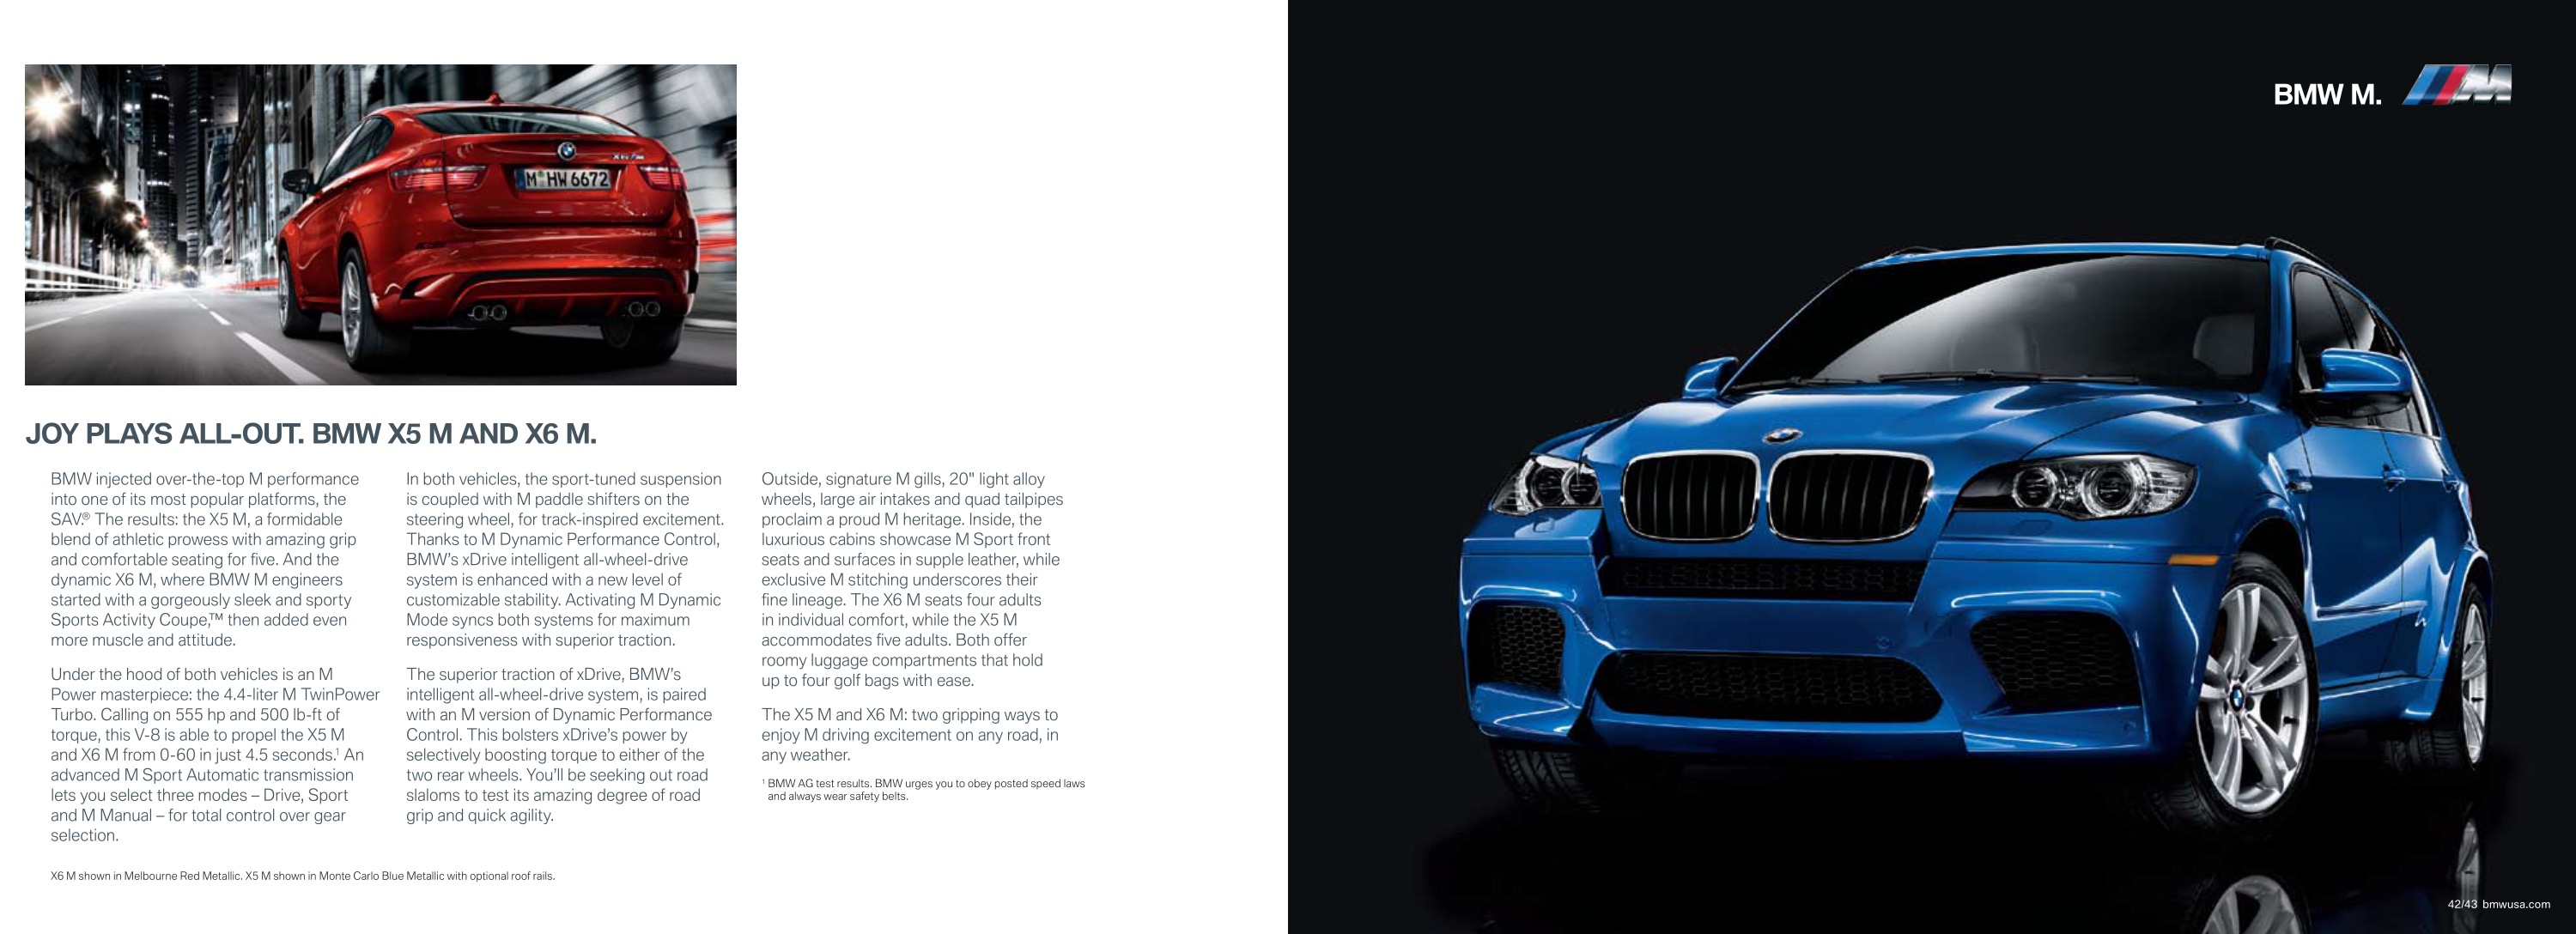 2011 BMW Full-Line Brochure Page 22